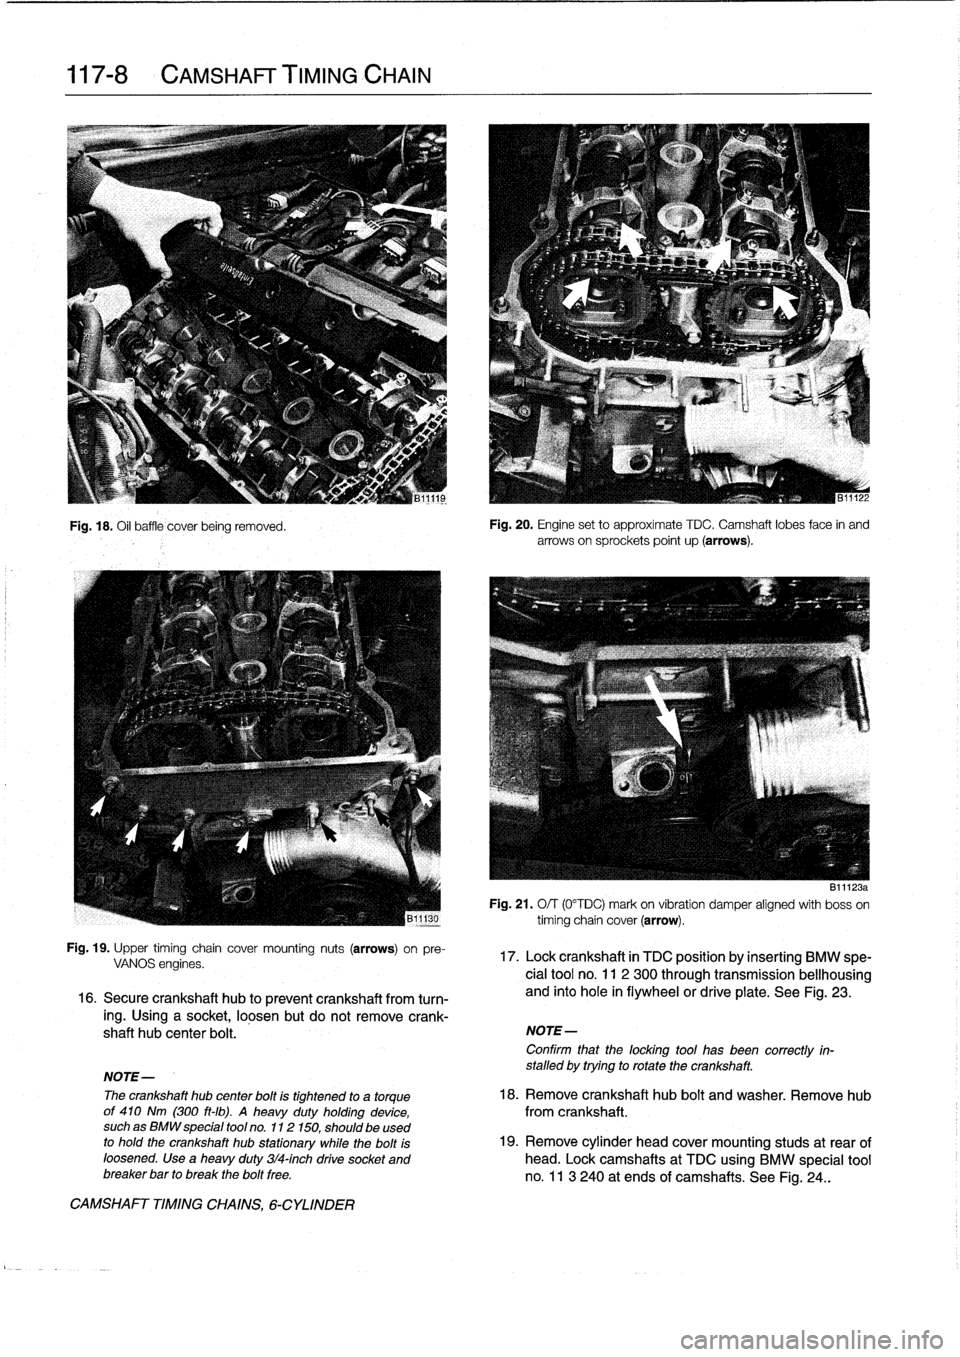 BMW M3 1993 E36 Owners Guide 
117-
8

	

CAMSHAFT
TIMING
CHAIN

Fig
.
18
.
Oil
baffle
cover
being
removed
.

Fig
.
19
.
Upper
timing
chaincover
mounting
nuts
(arrows)
on
pre-
VANOS
engines
.

16
.
Secure
crankshaft
hub
to
preven